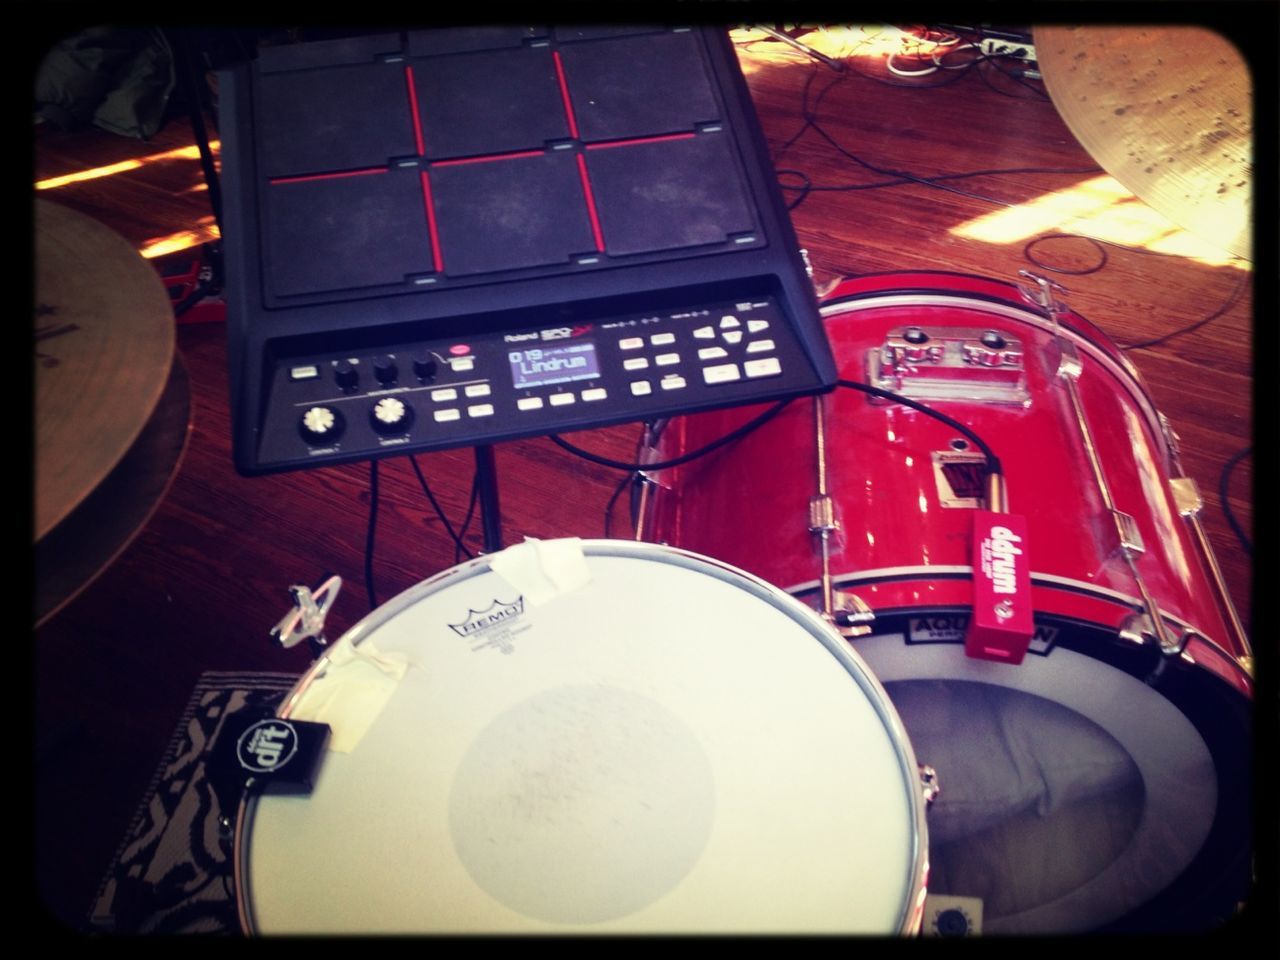 NYE rehearsal with Wild Cub. Prince covers require drum triggers!!